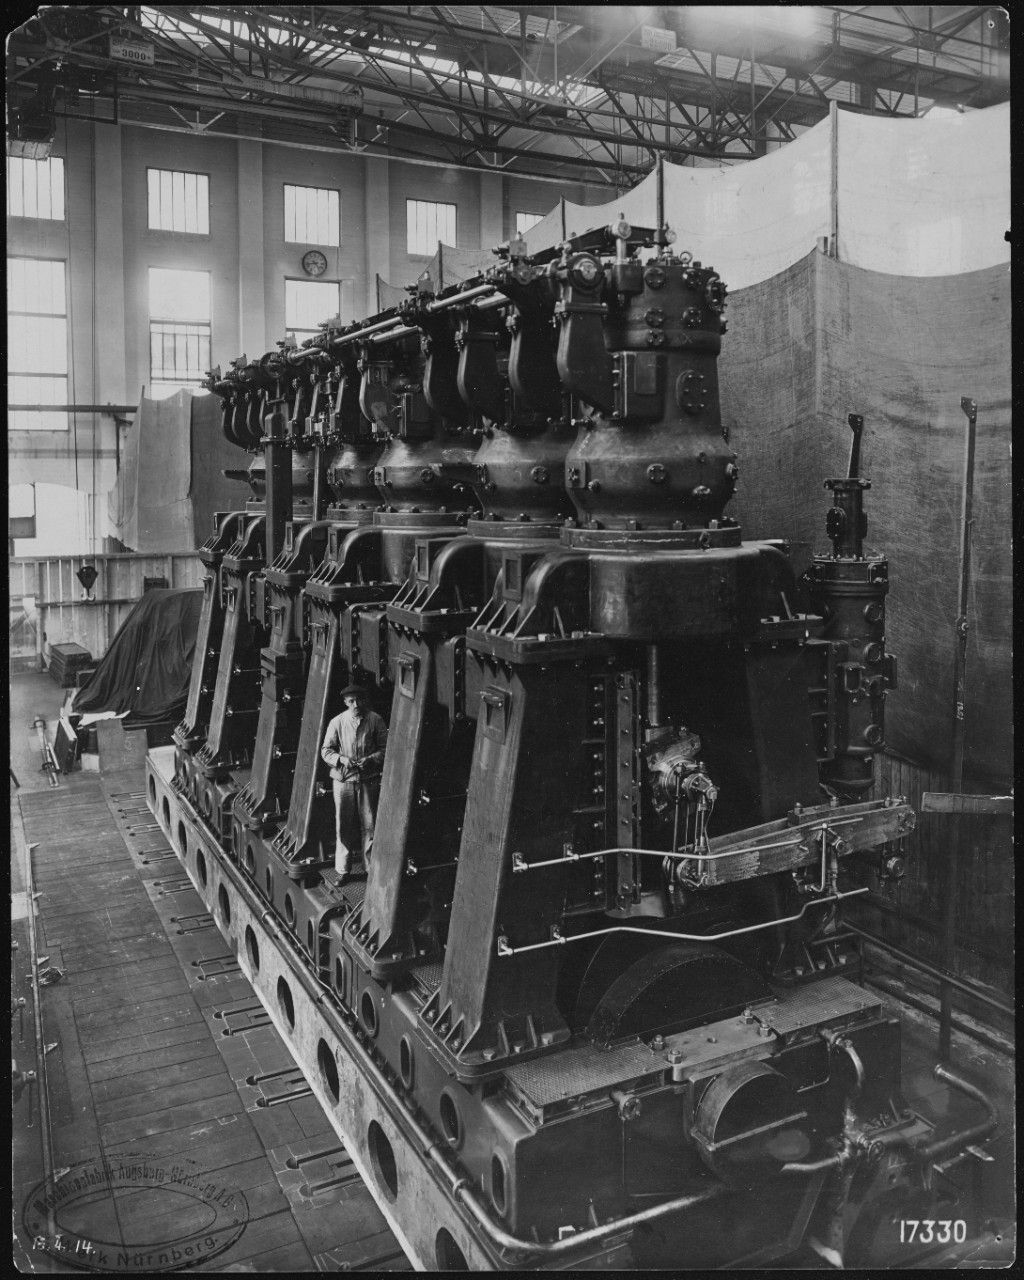 Diesel Engine for USS MAUMEE